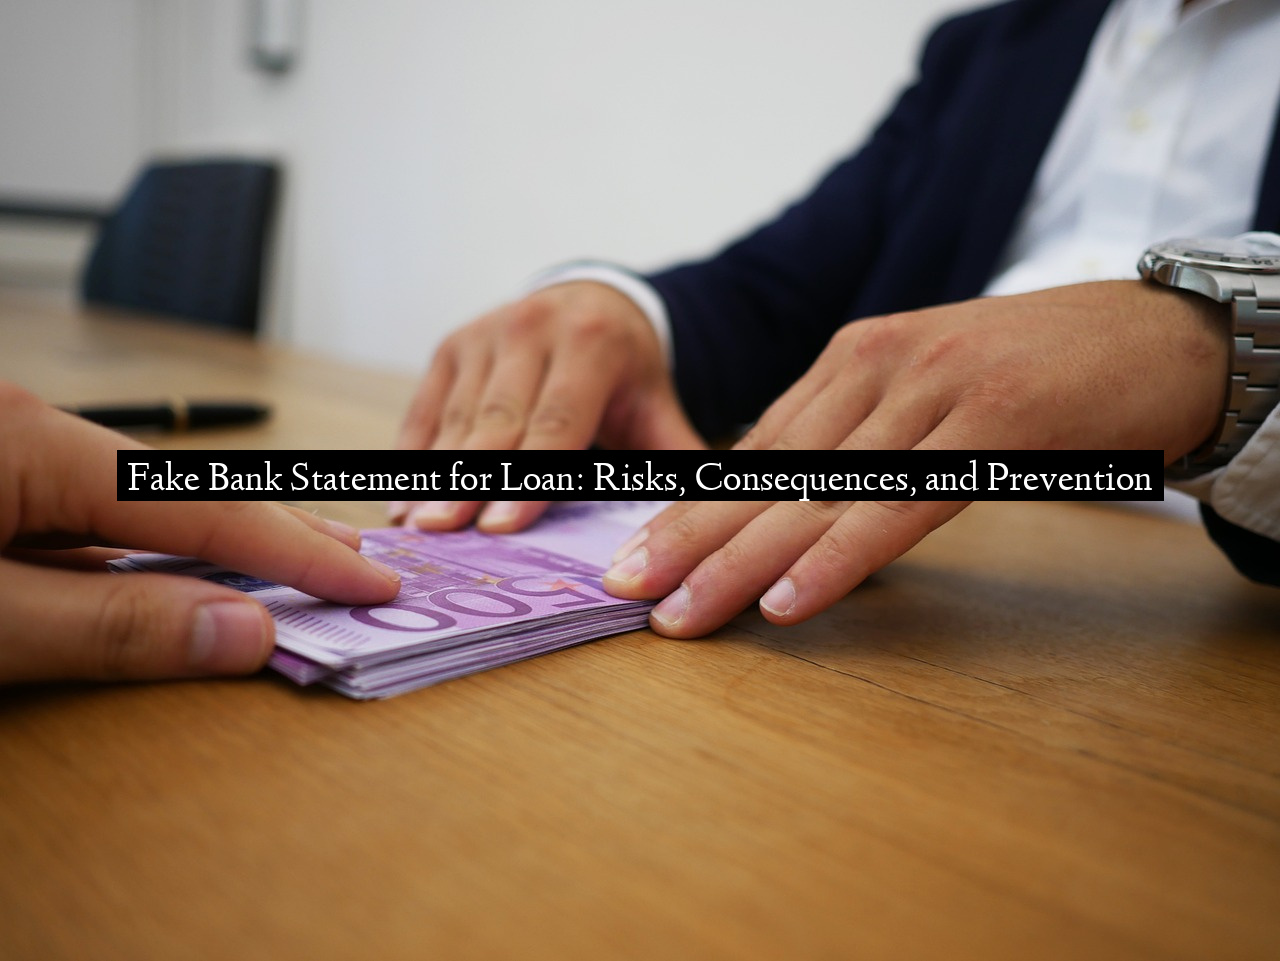 Fake Bank Statement for Loan: Risks, Consequences, and Prevention